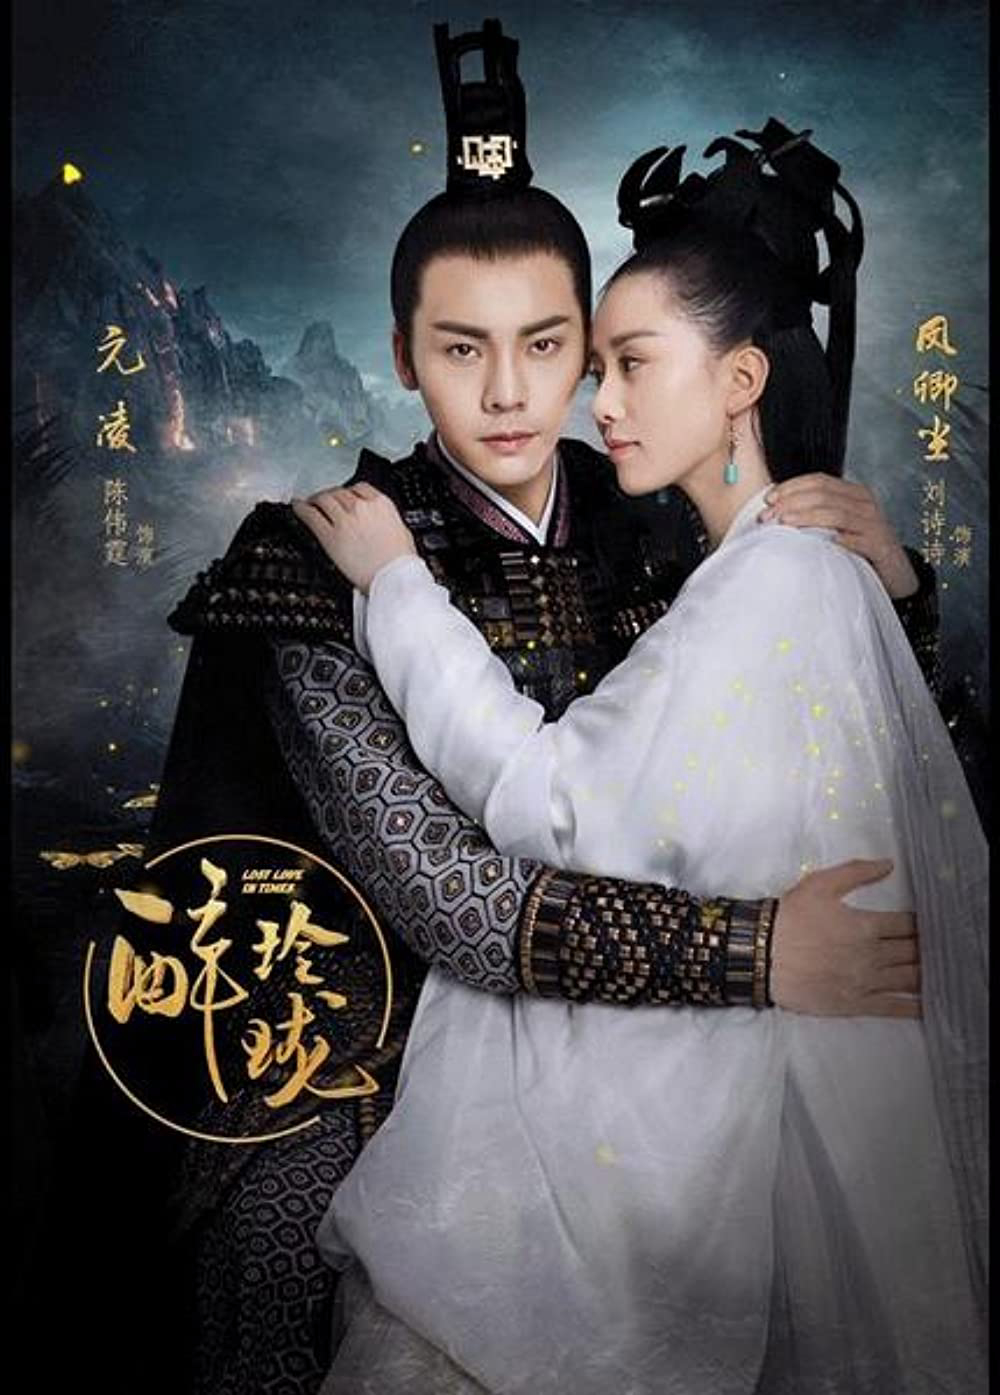 Poster Phim Túy Linh Lung (Lost Love in Times)